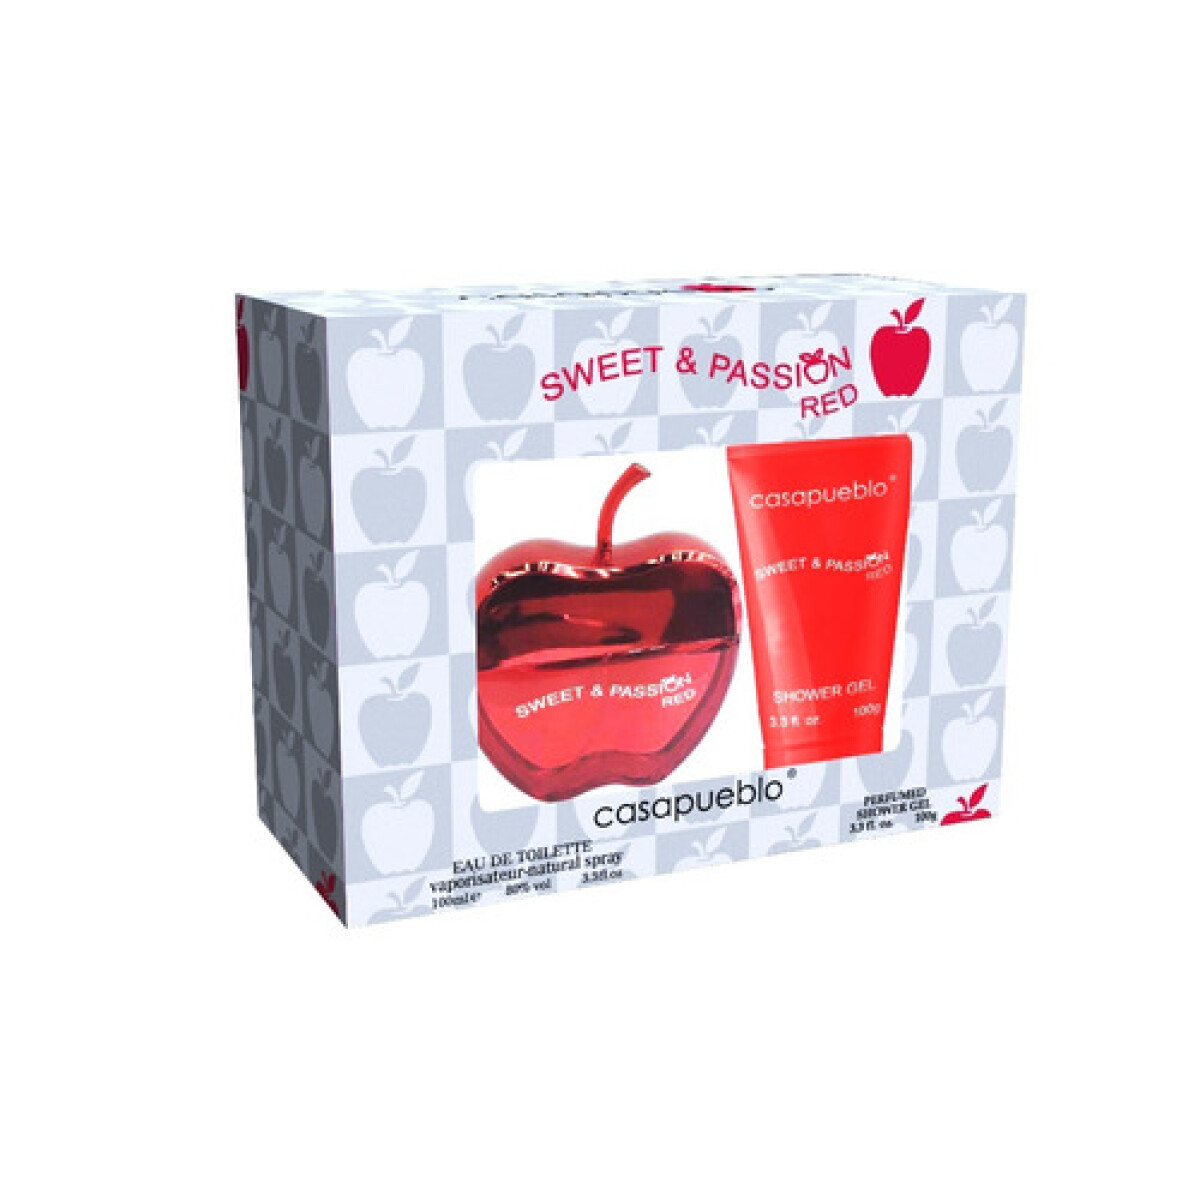 PACK SWEET POMEGRANATE COLONIA 100ML+ CREMA CORPORAL 120G 